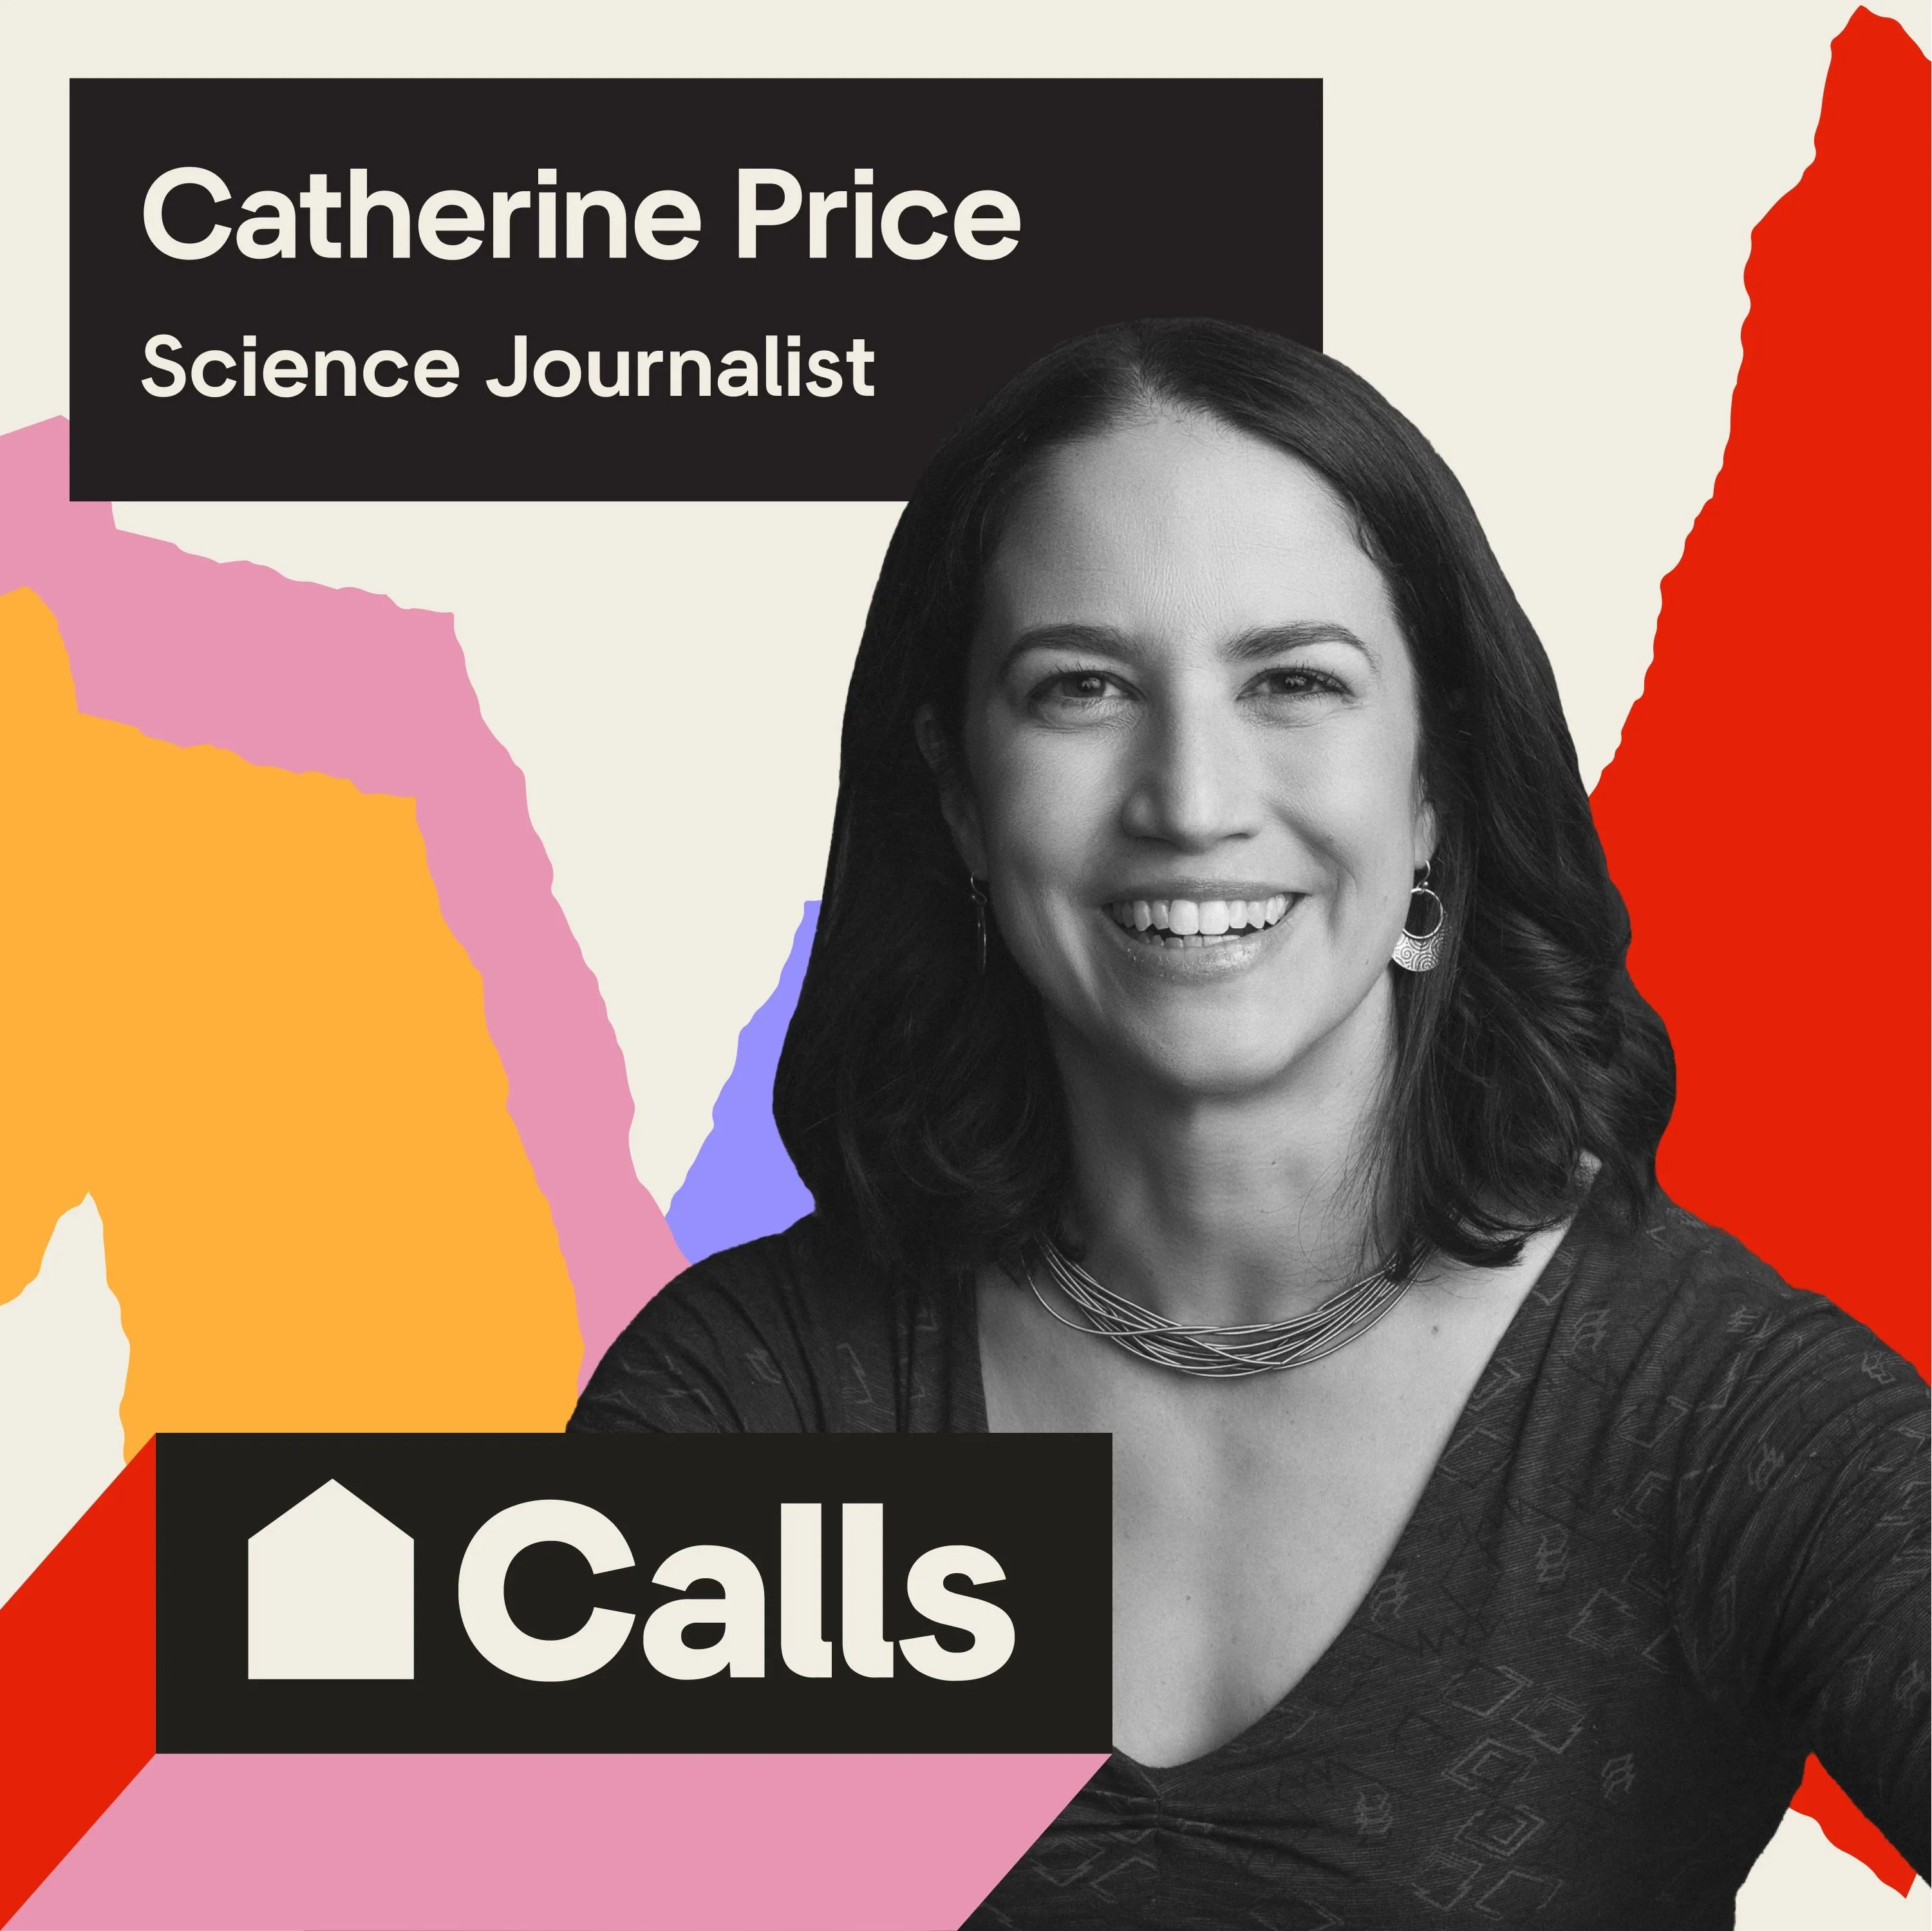 Headshot of Catherine Price, Science Journalist and Author